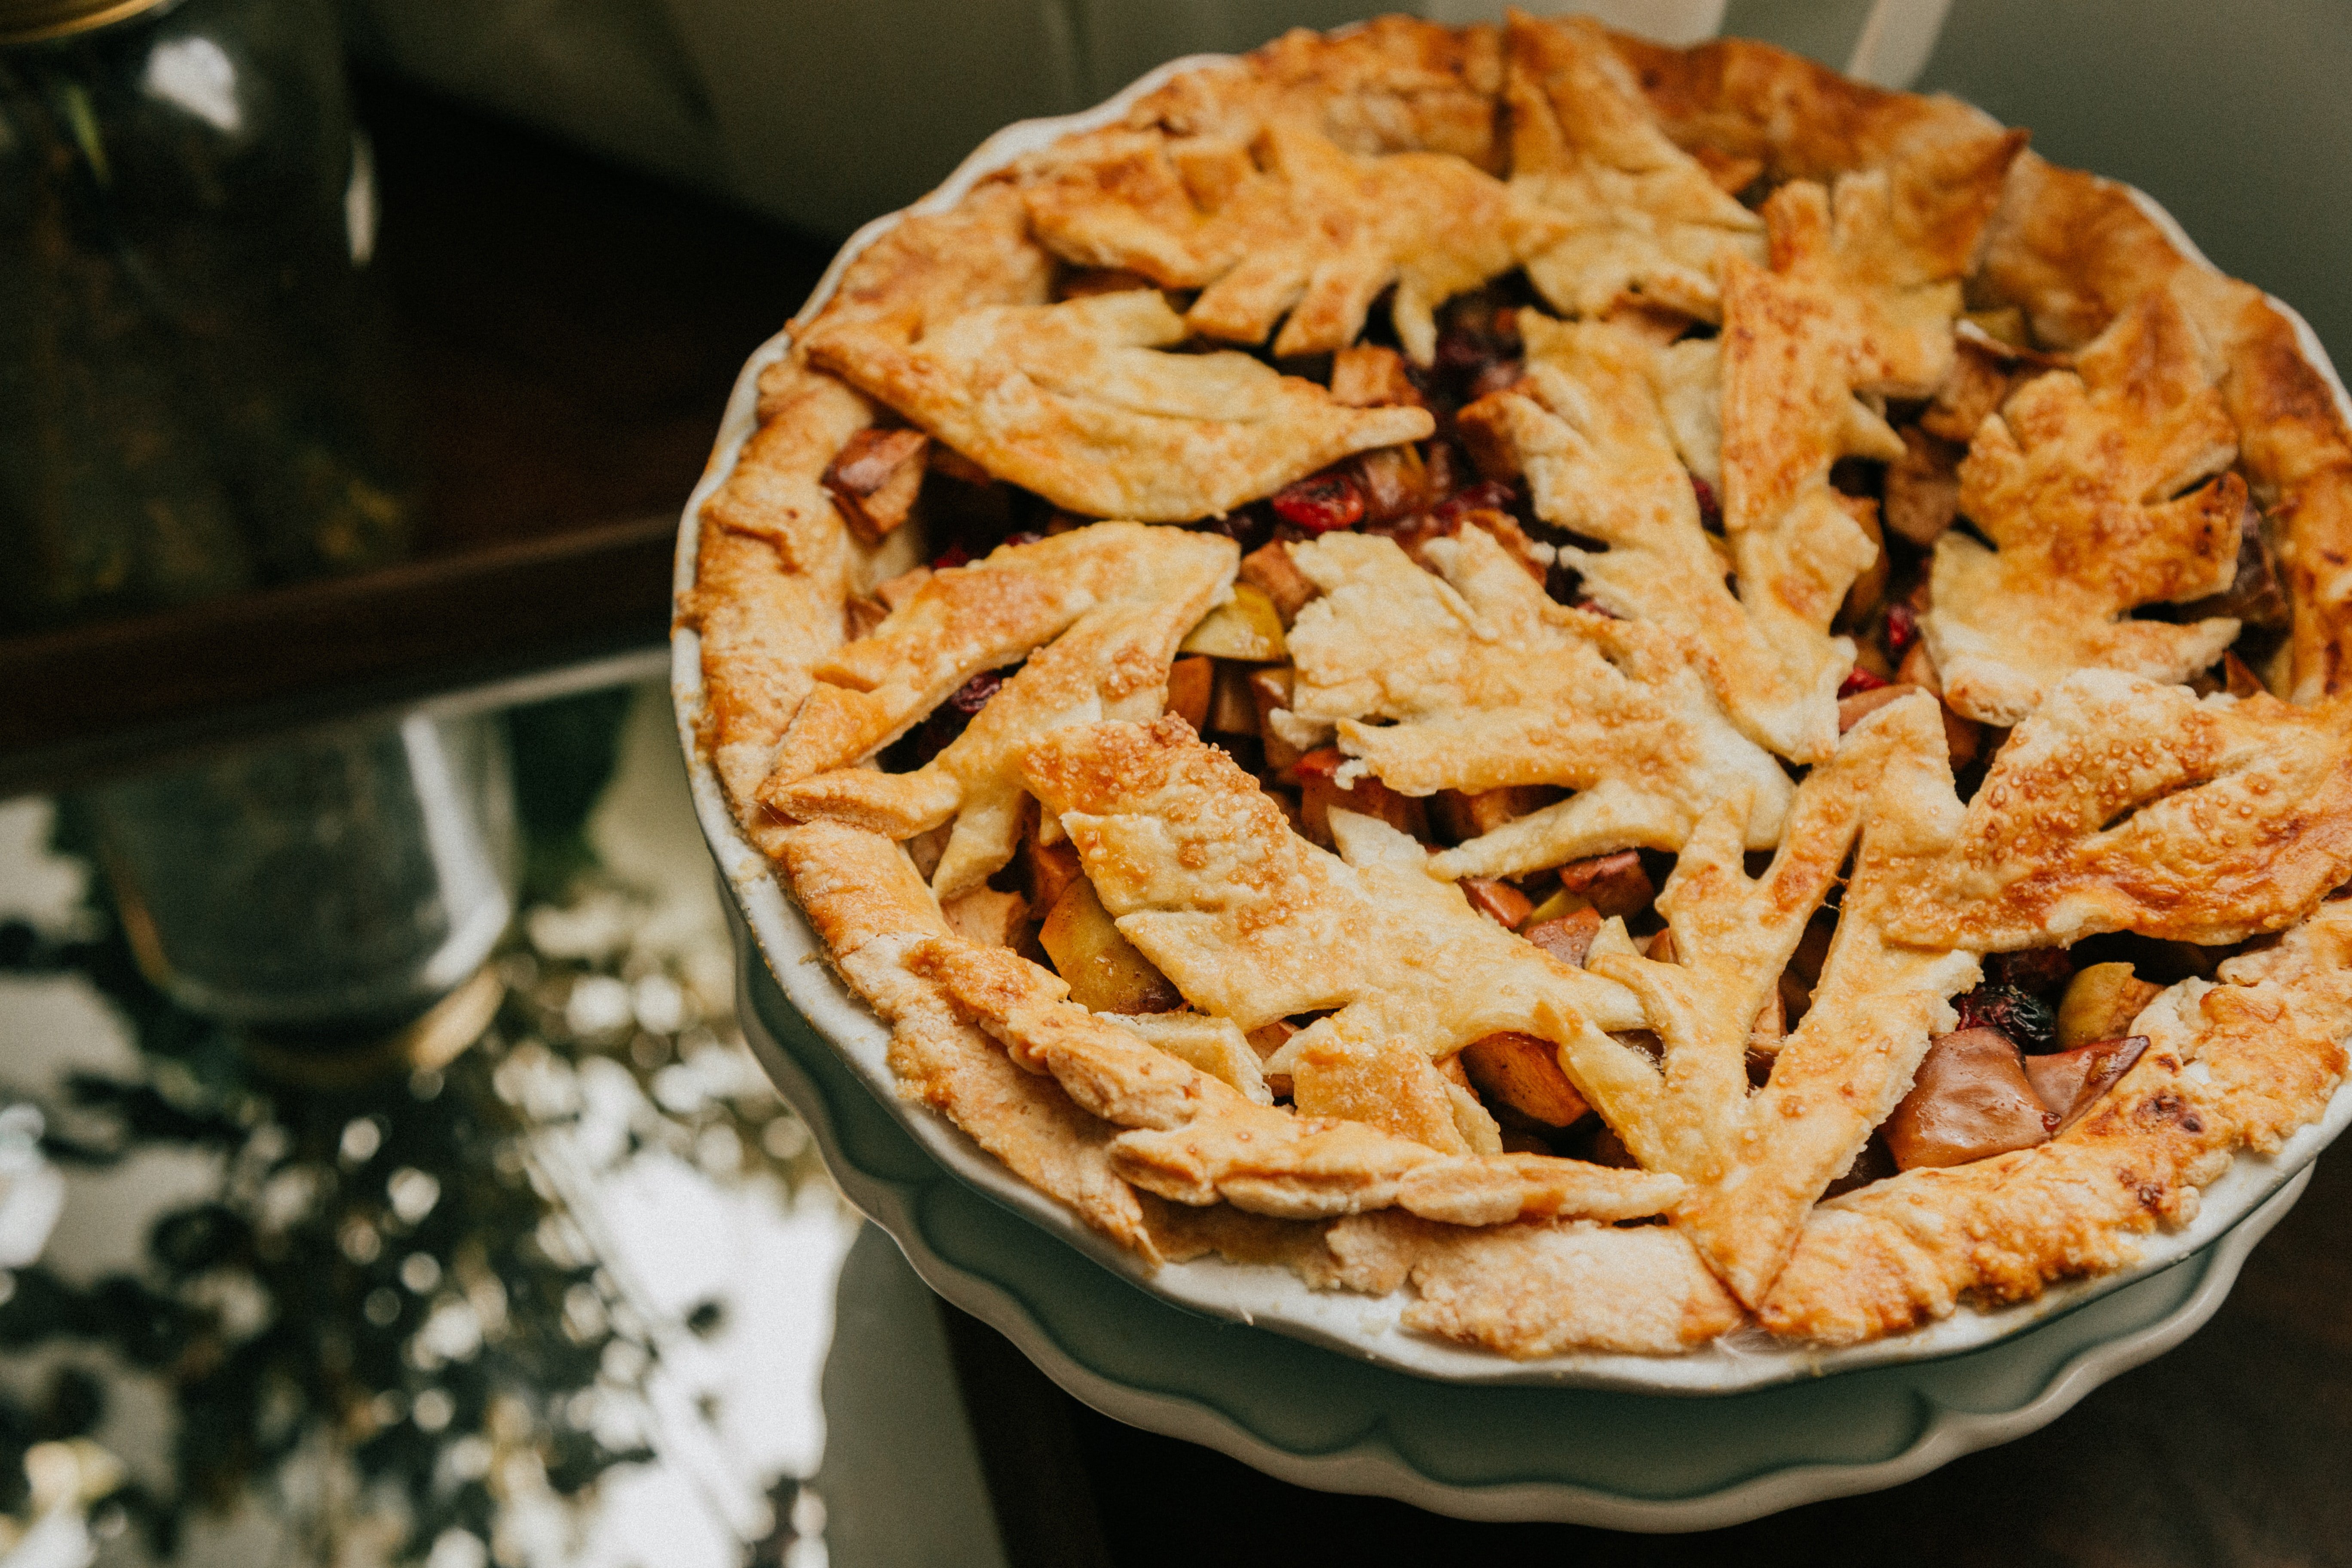 Karen made a delicious apple pie for Dave. | Source: Unsplash